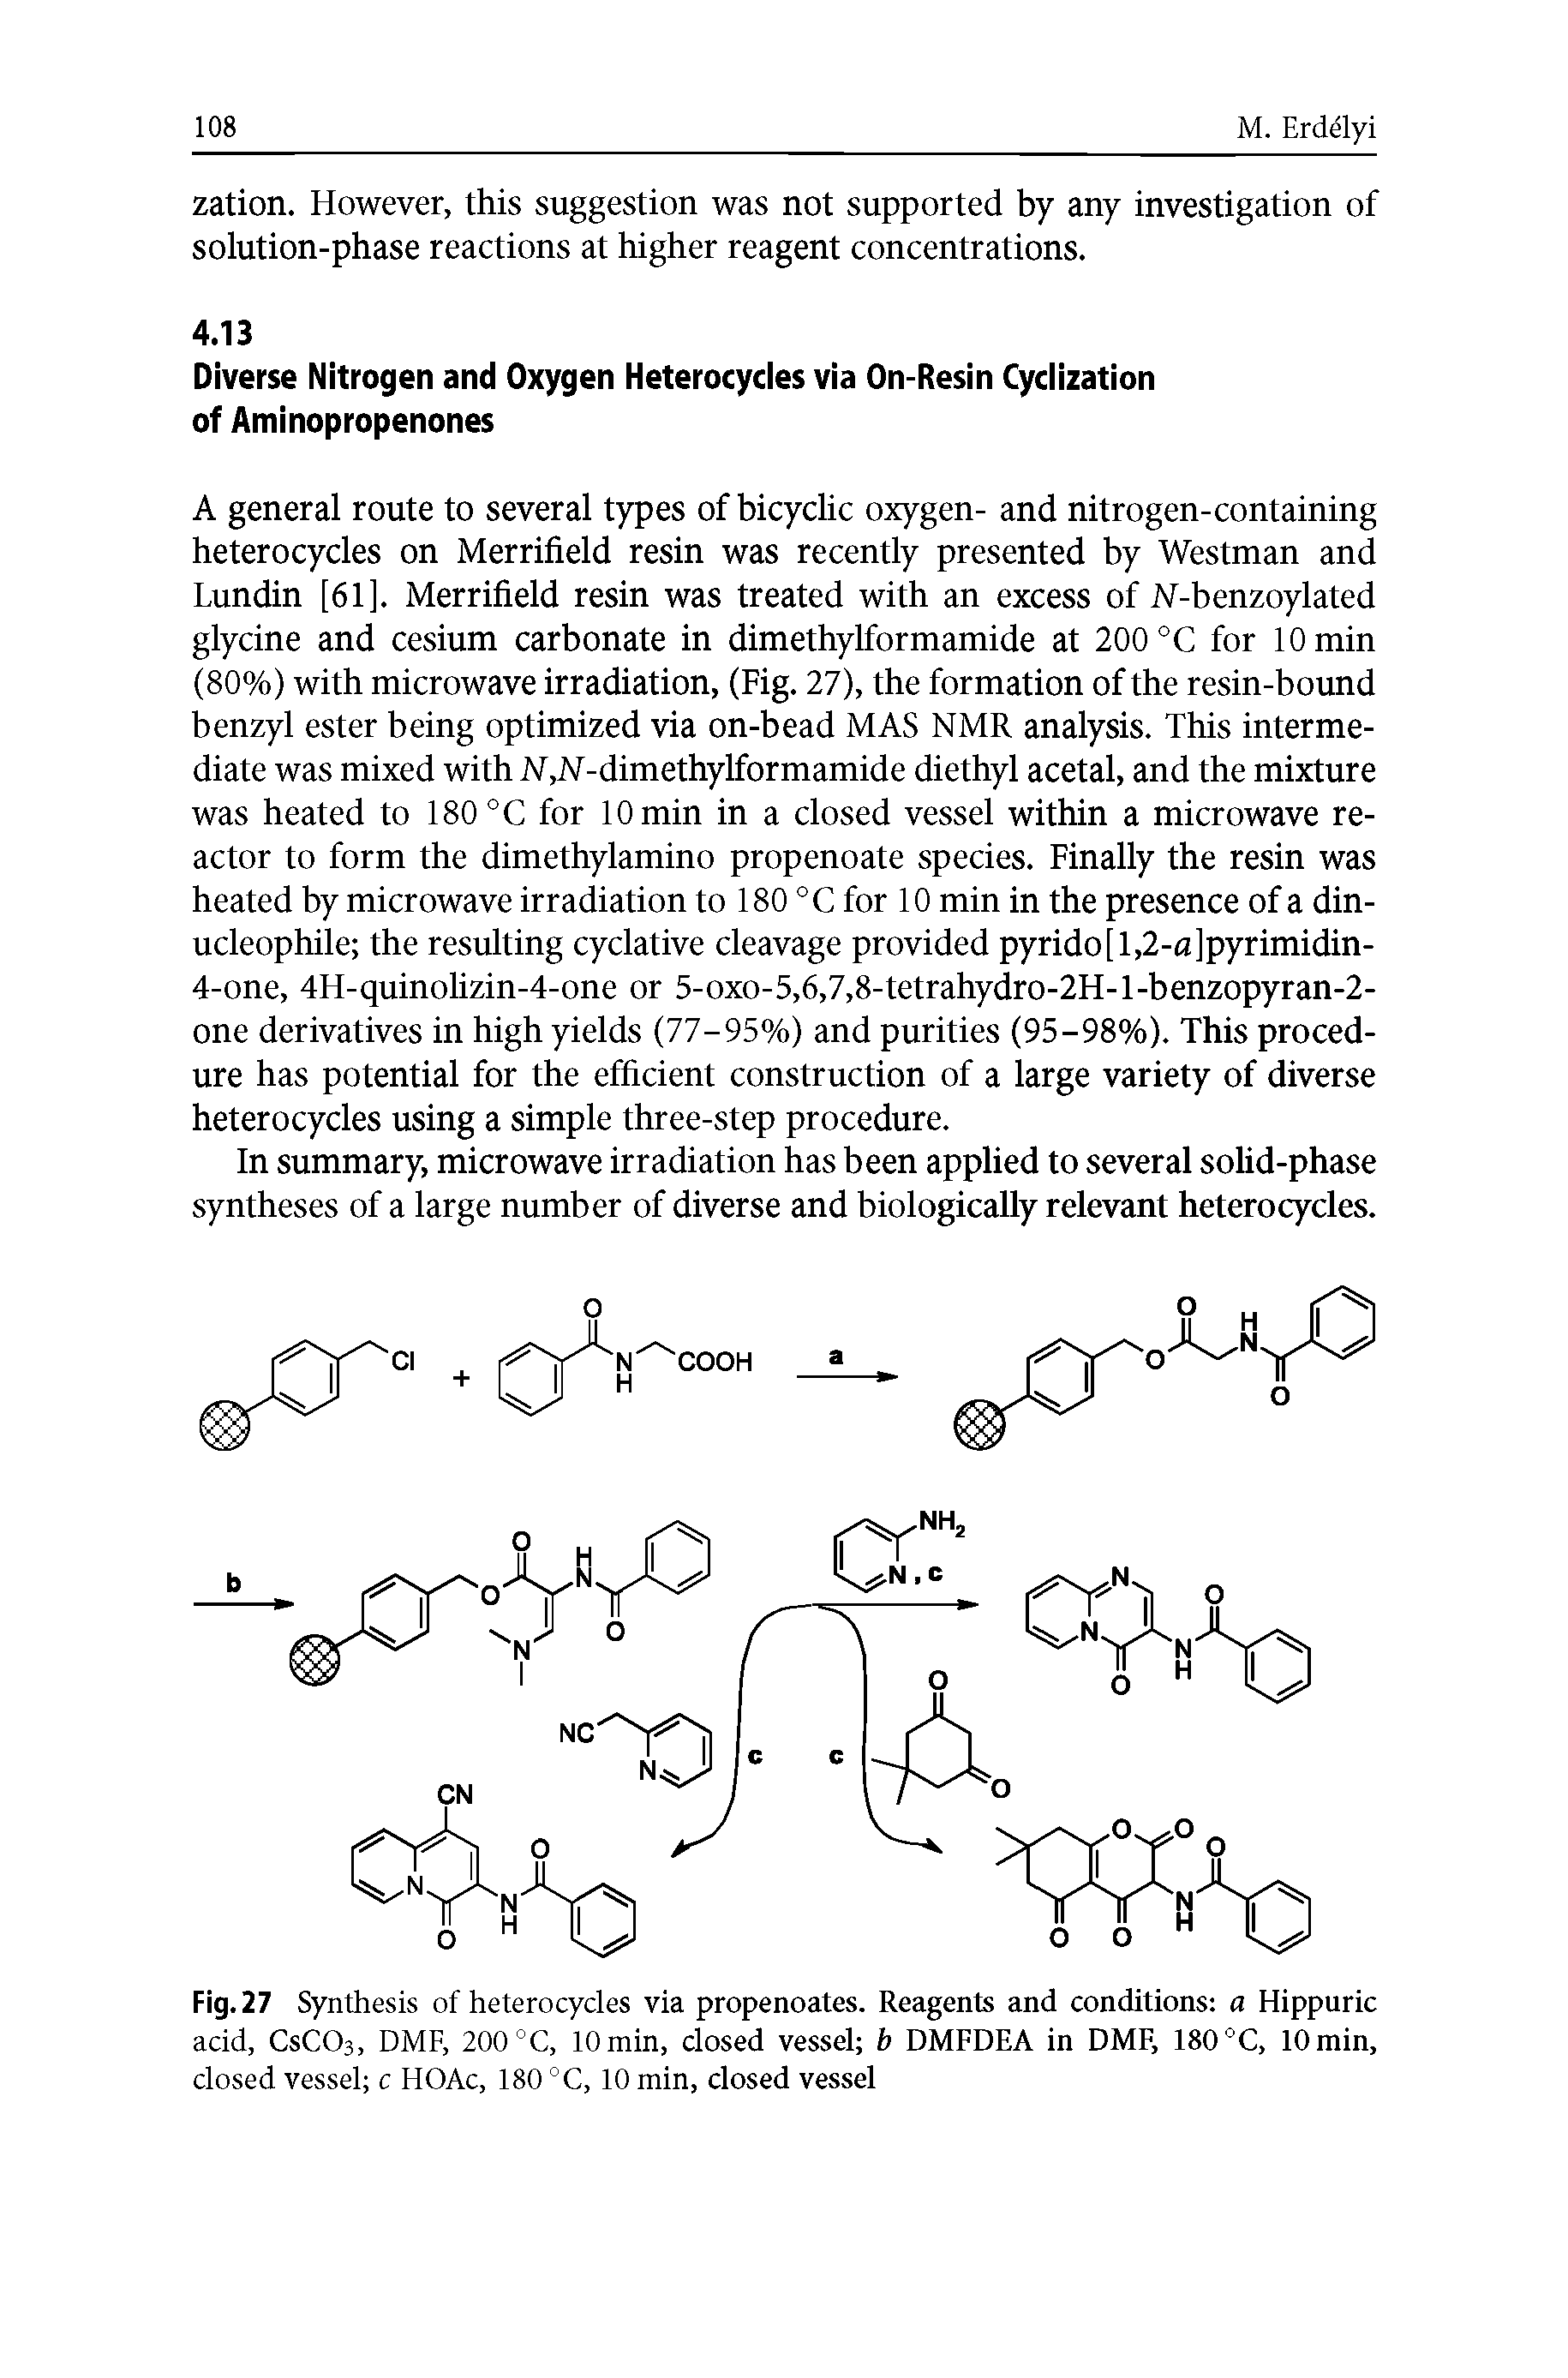 Fig. 27 Synthesis of heterocycies via propenoates. Reagents and conditions a Hippuric acid, CsCOs, DMF, 200 °C, 10 min, closed vessel b DMFDEA in DMF, 180 °C, 10 min, closed vessel c HOAc, 180 °C, 10 min, closed vessel...